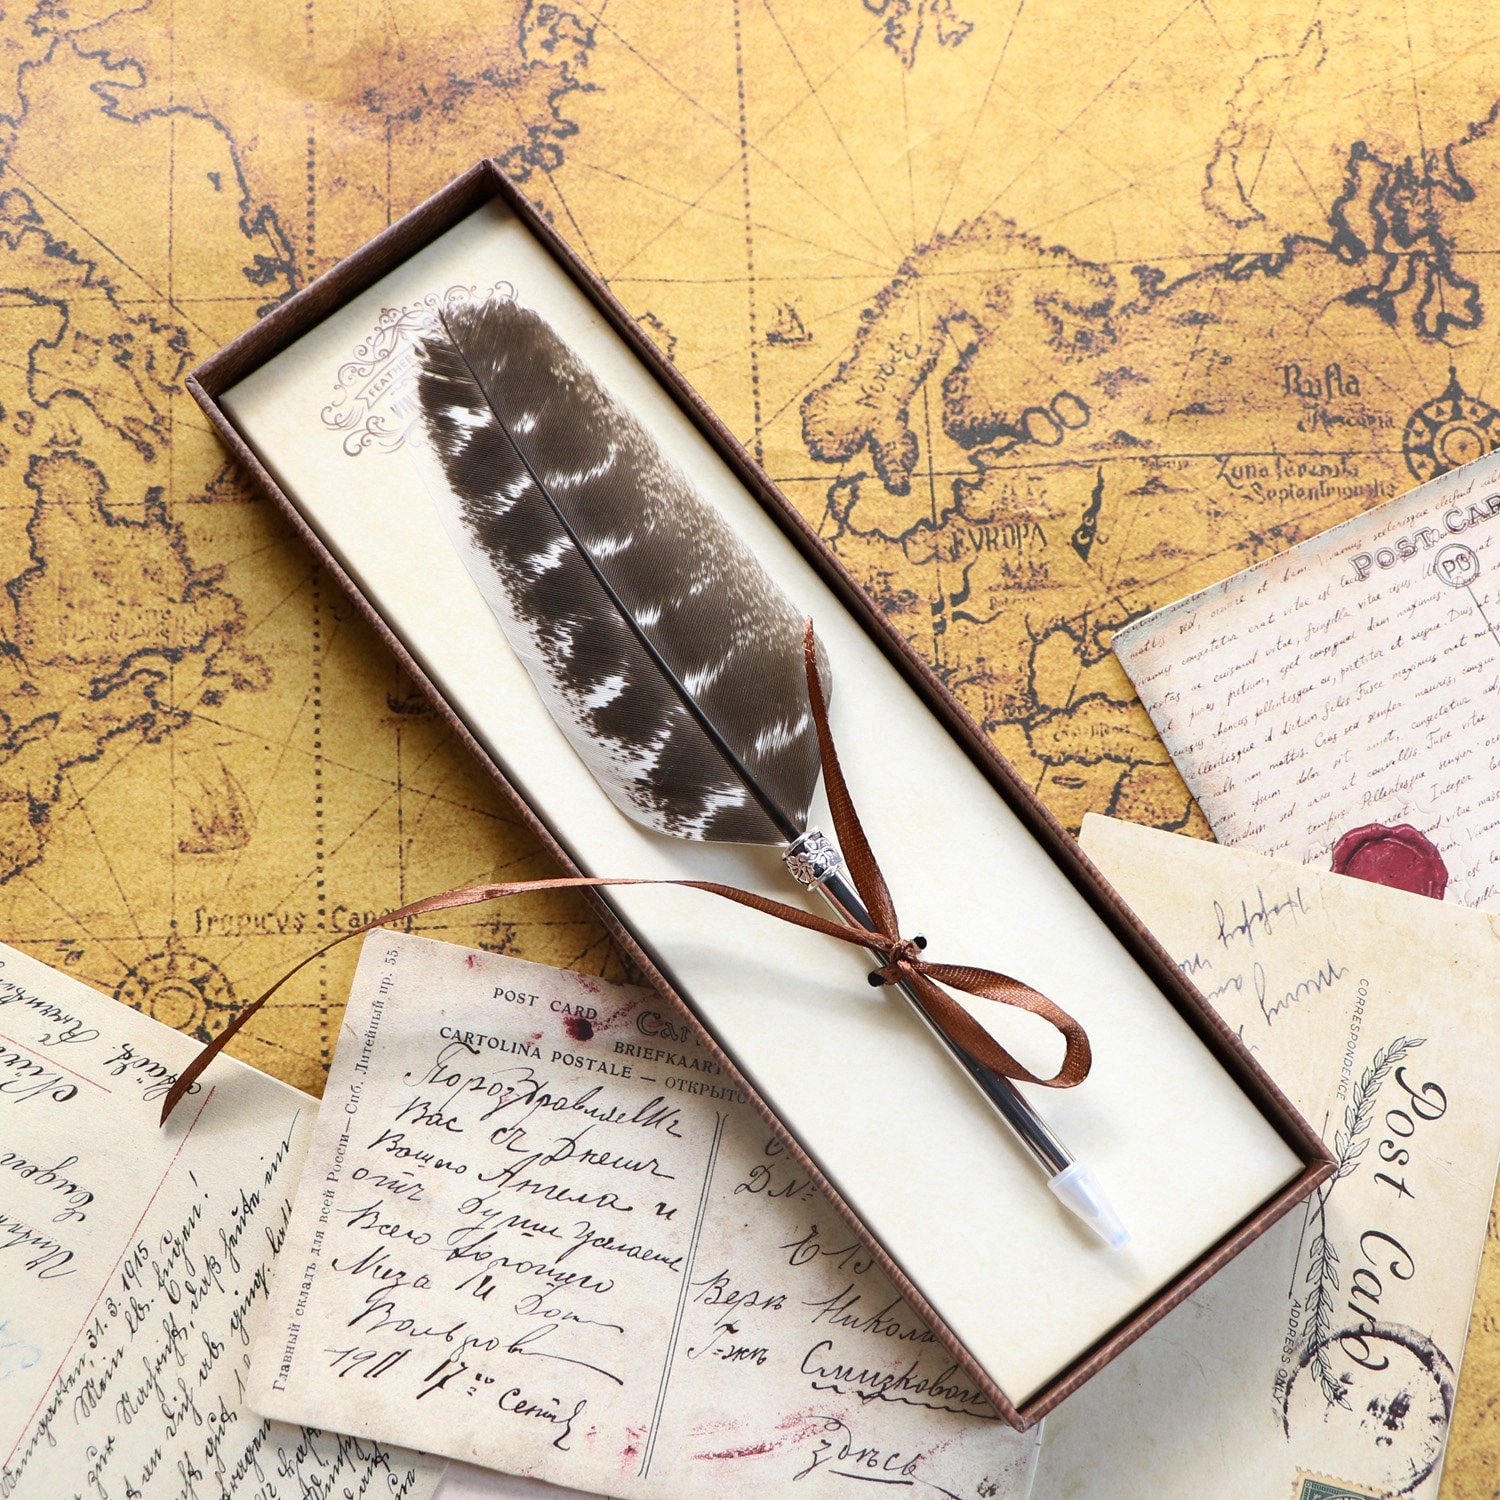 Trustela's Quill And Ink Wax Stamp Set - Wooden Pen, Feather Pen Antique,  Dip Pen Stand/Seal, Nibs, Wax, Spoon And Ink Well In A Gift Box